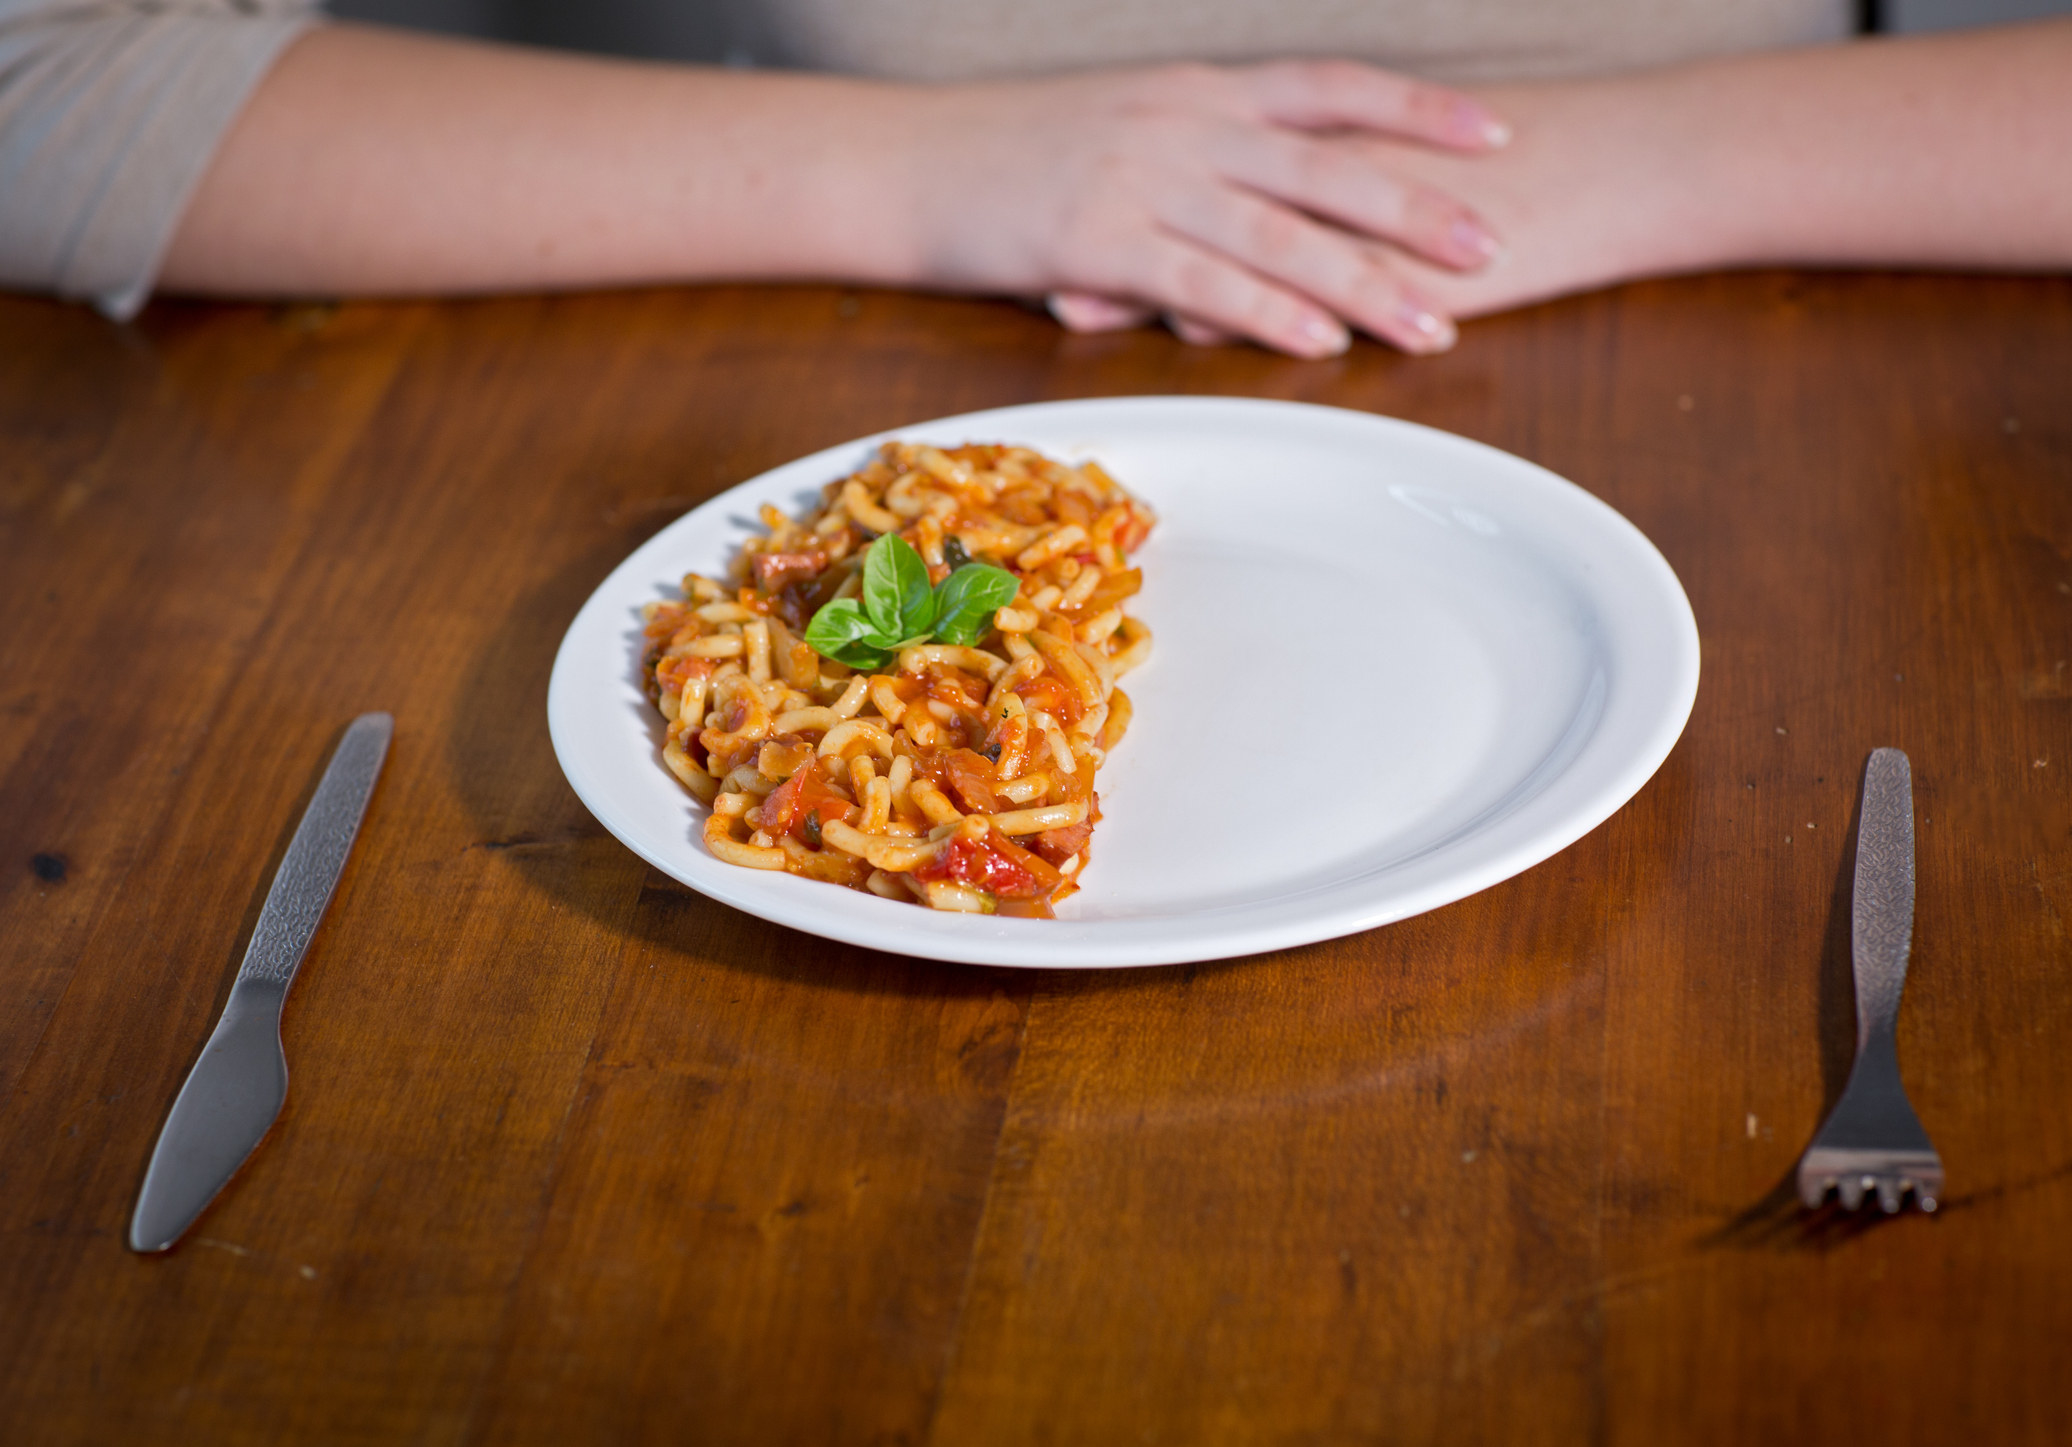 Person seated with hands folded, with a half empty plate of pasta in front of them, knife and fork on either side of the plate